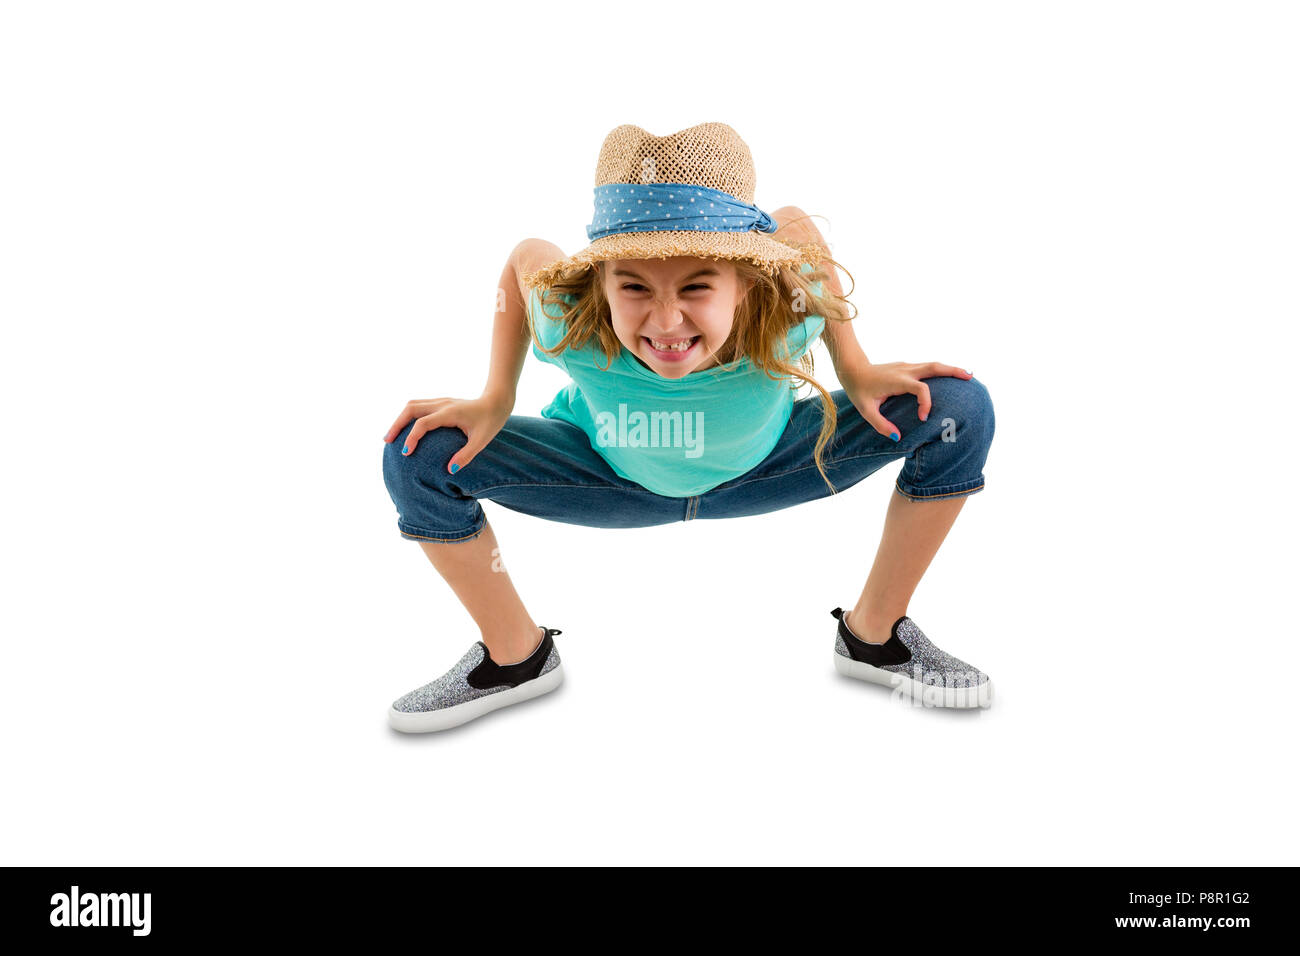 Mischievous naughty little girl bending forwards towards the camera with an impish grin in a trendy straw sunhat and jeans Stock Photo